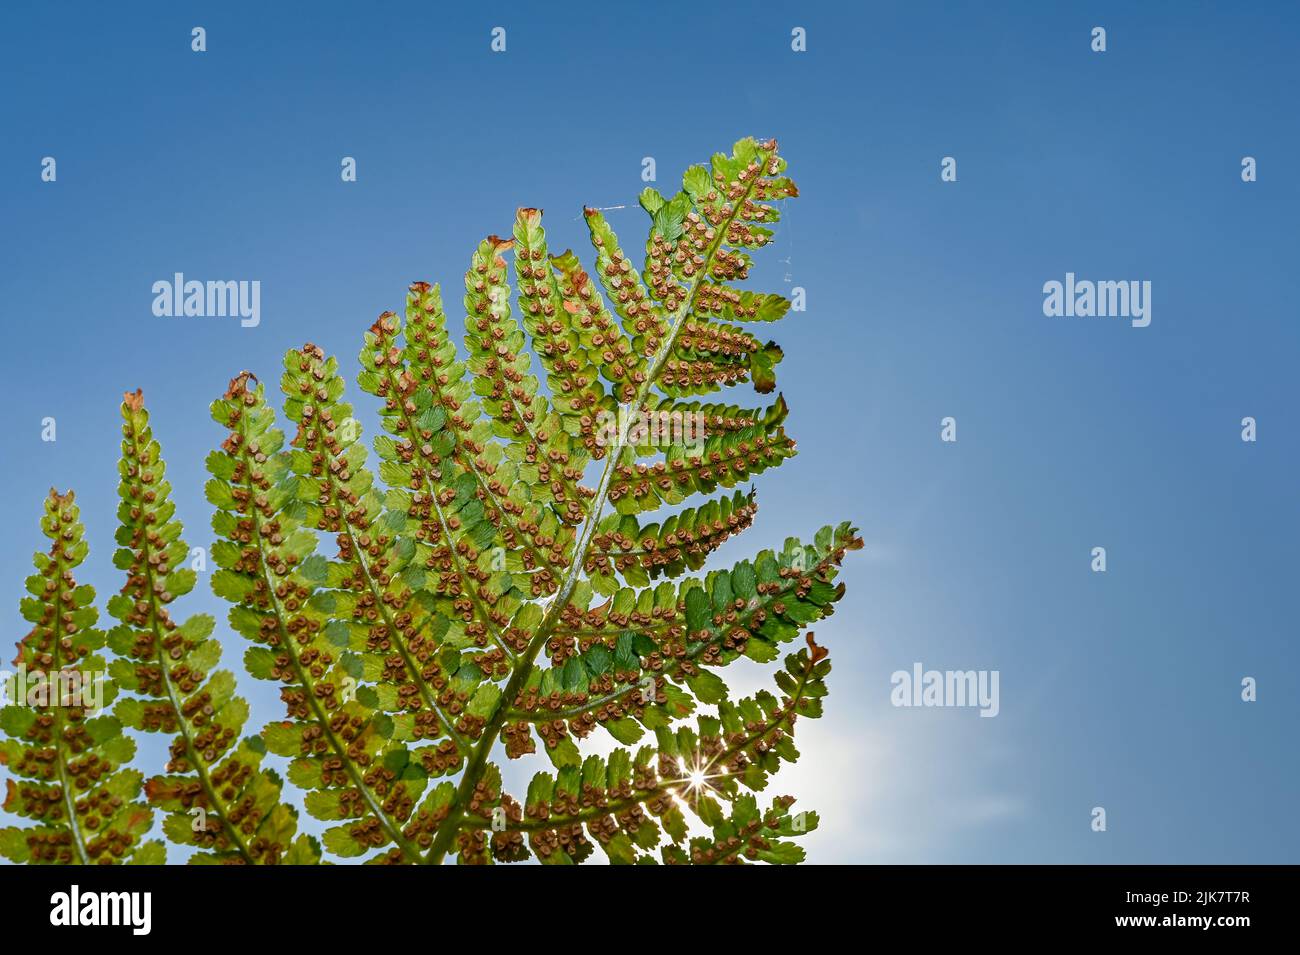 Fern in the sky. Clusters of sporangia on a fern. Groupes de sporanges on fern leaves. Reproduction of olypodiopsida or Polypodiophyta. Beaty in natur Stock Photo